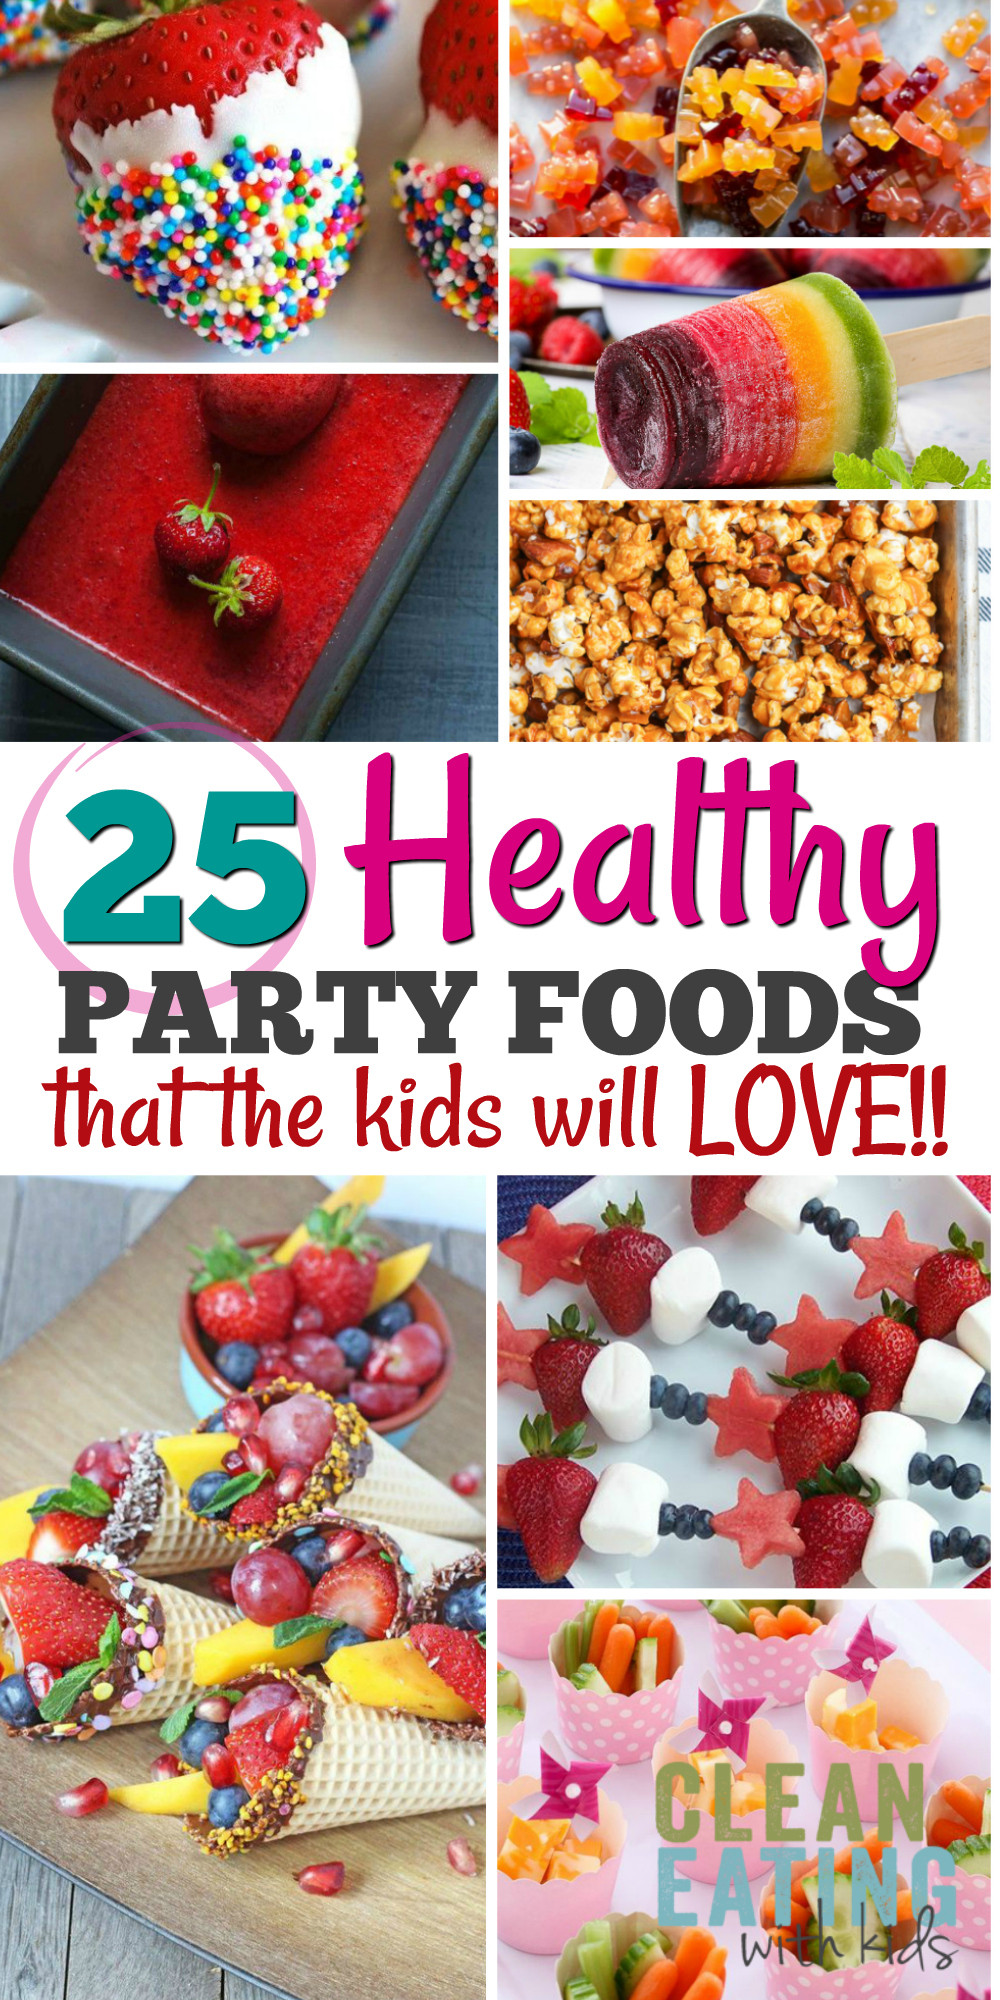 Food For Kids Party
 25 Healthy Birthday Party Food Ideas Clean Eating with kids